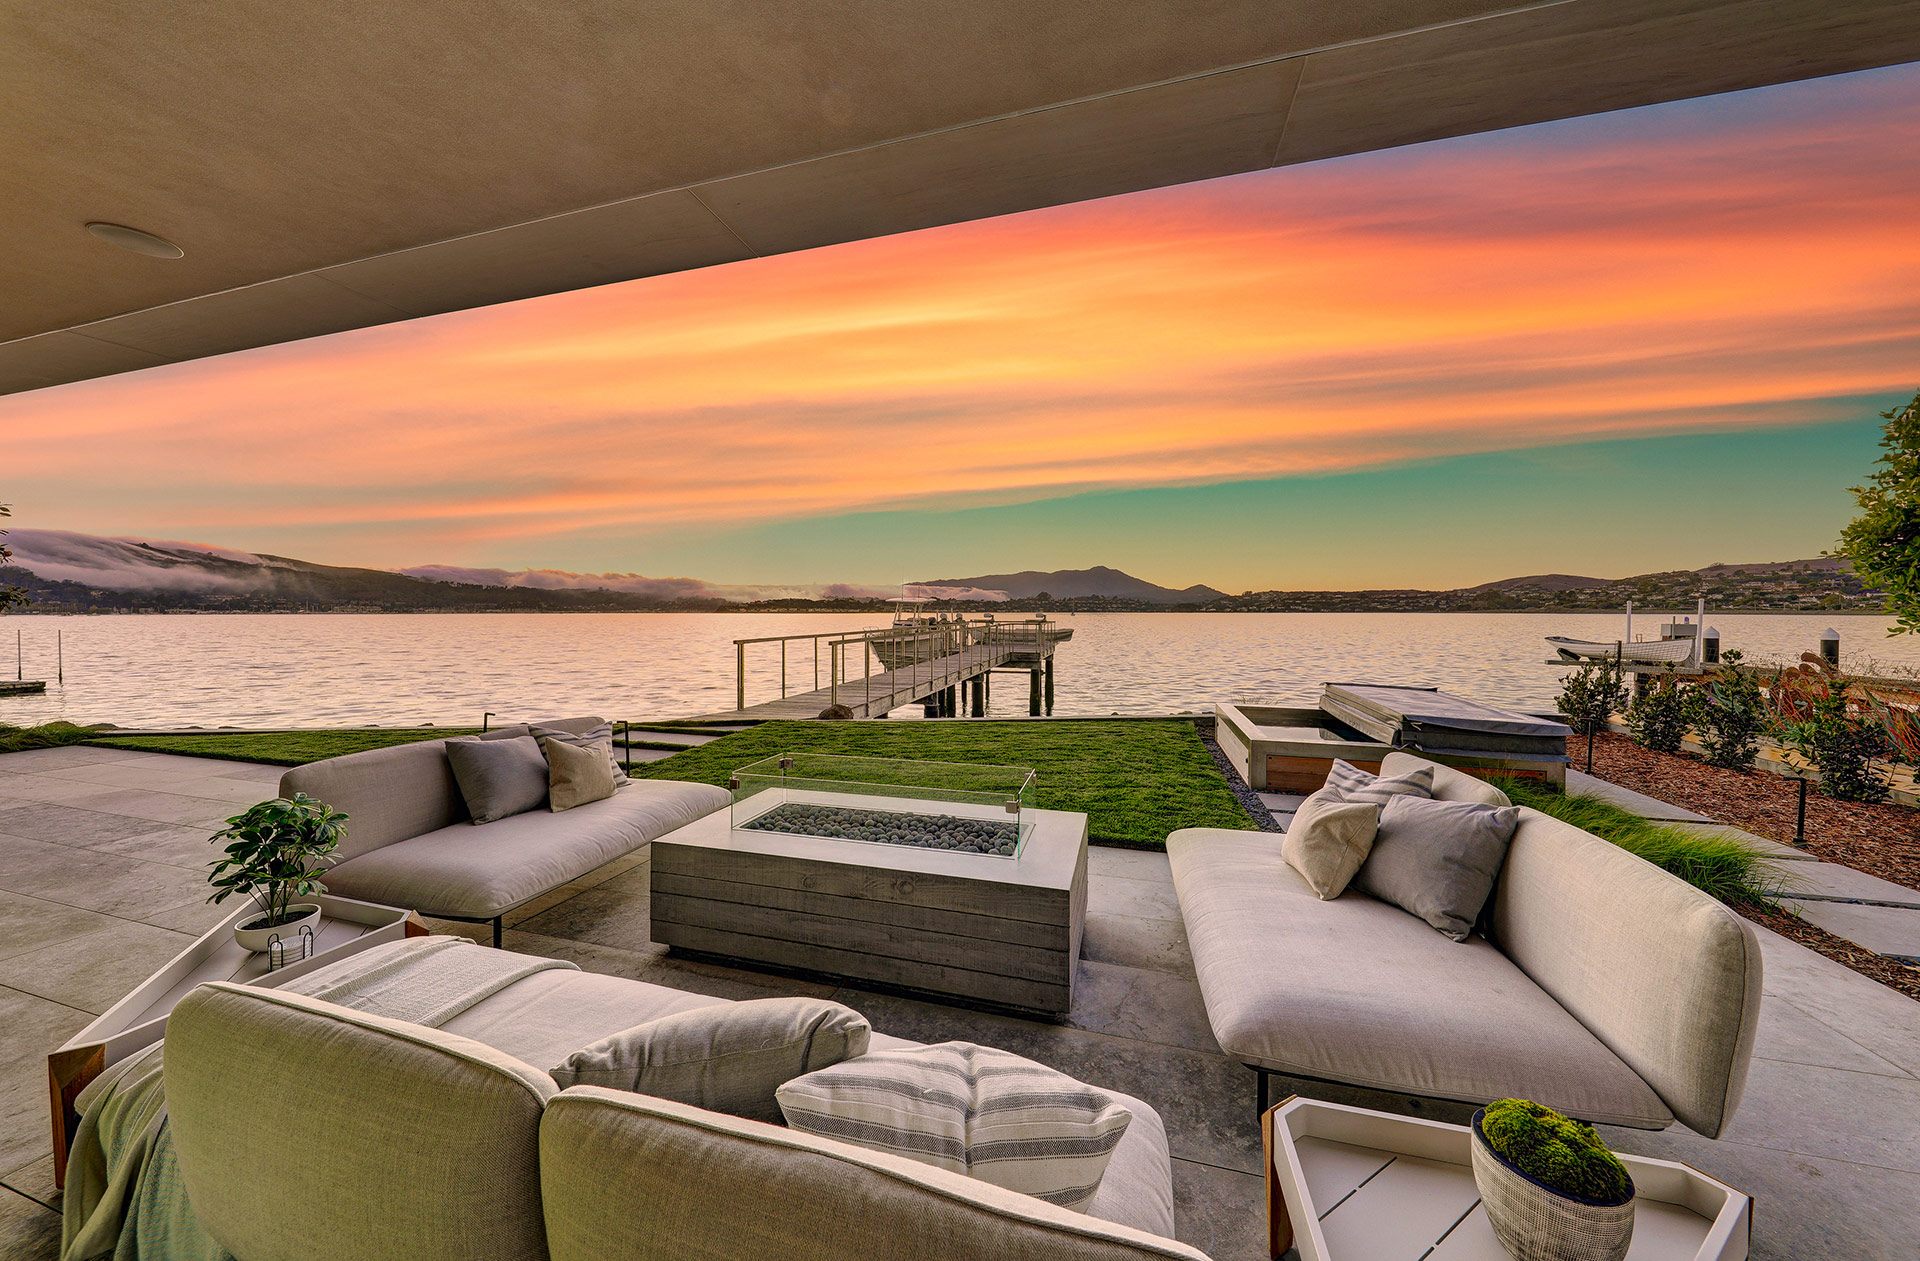 Display Image for Patio at sunset looking over water